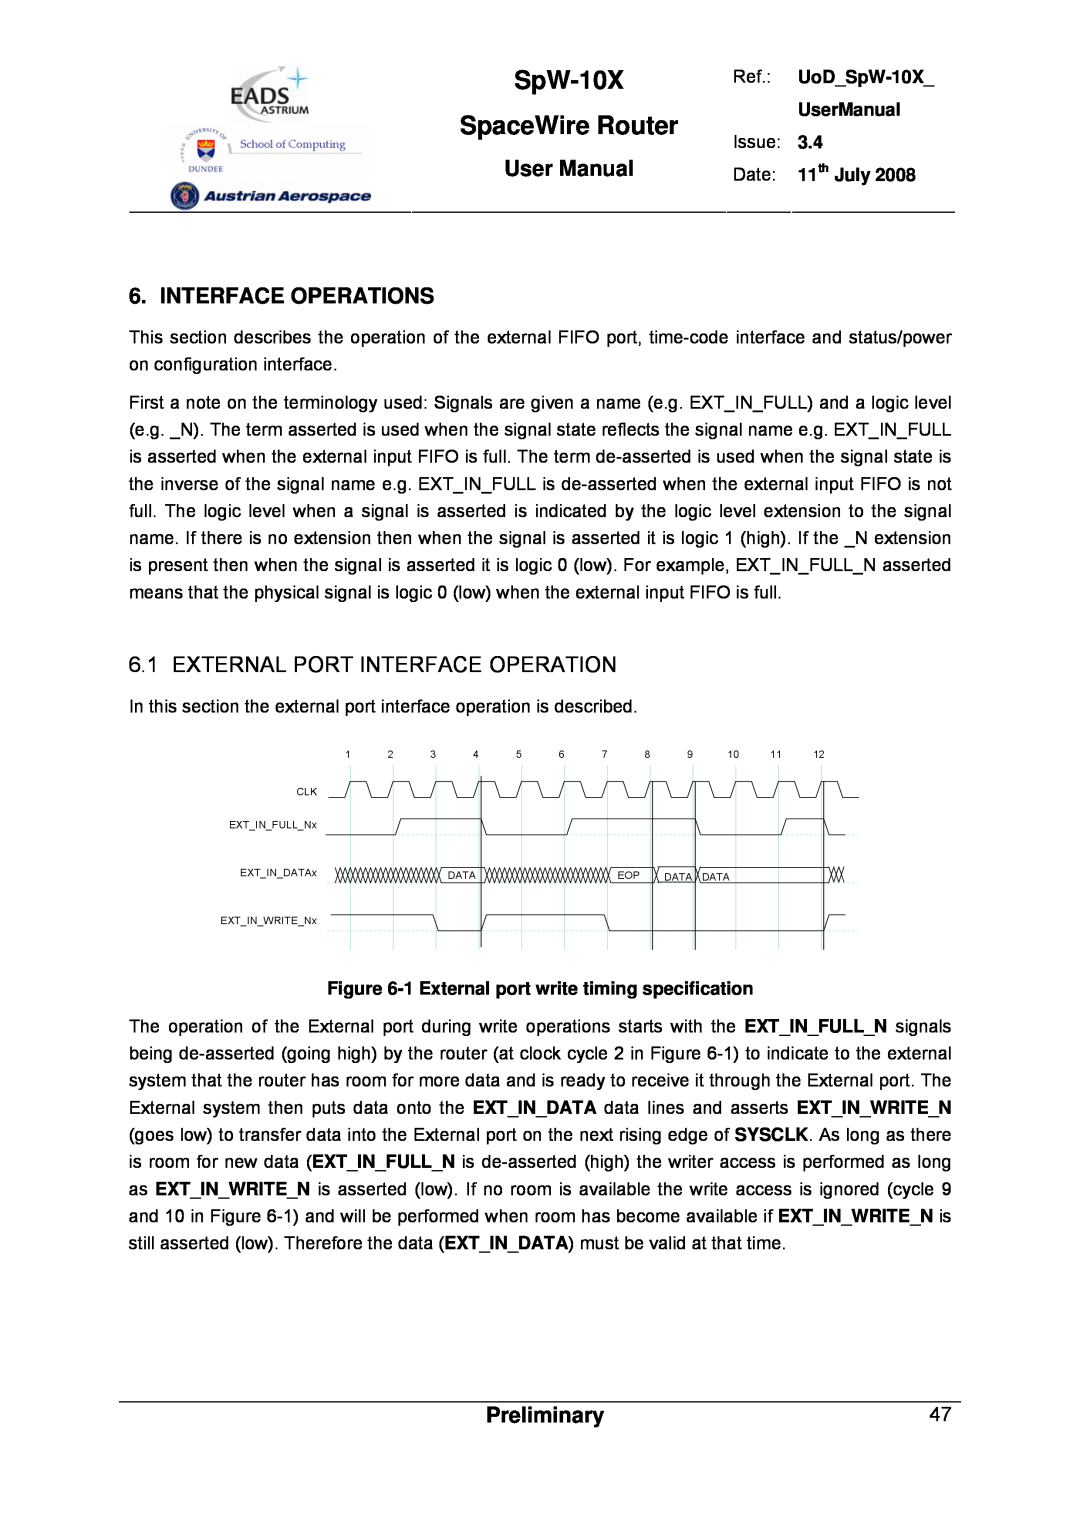 Atmel SpW-10X Interface Operations, External Port Interface Operation, SpaceWire Router, User Manual, Preliminary 